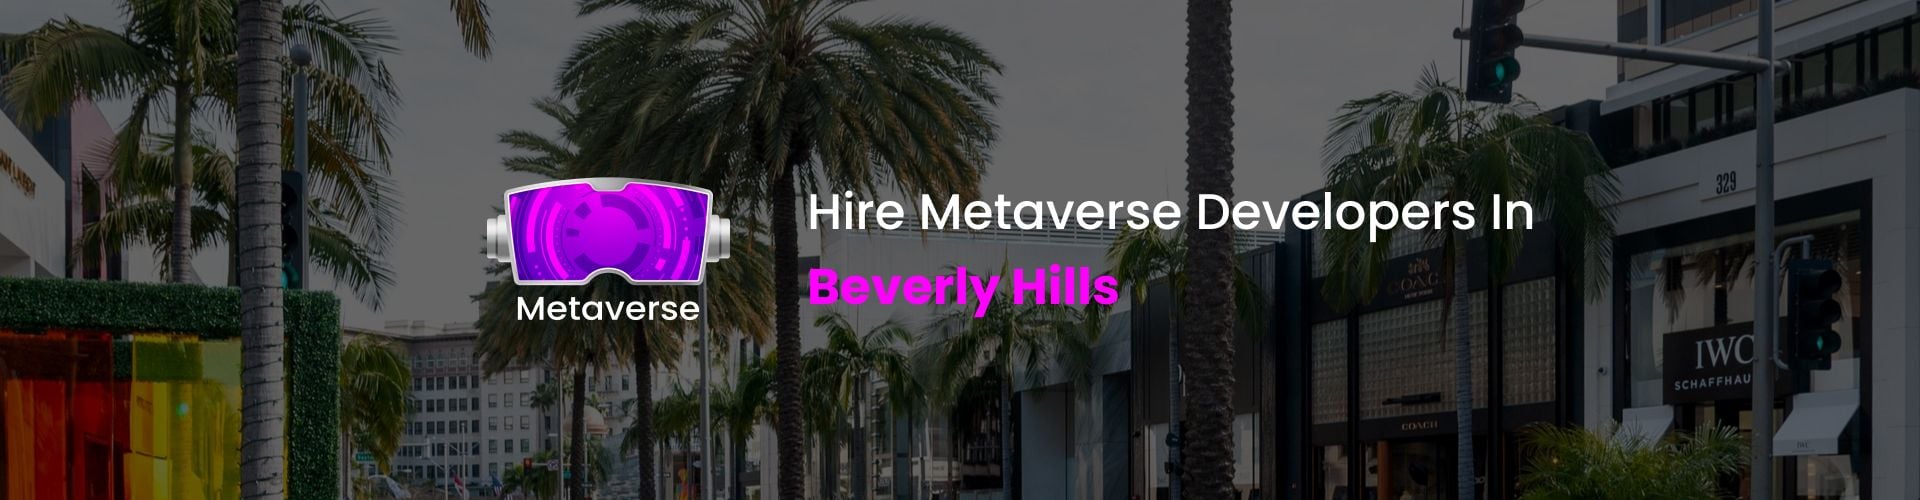 metaverse developers in beverly hills